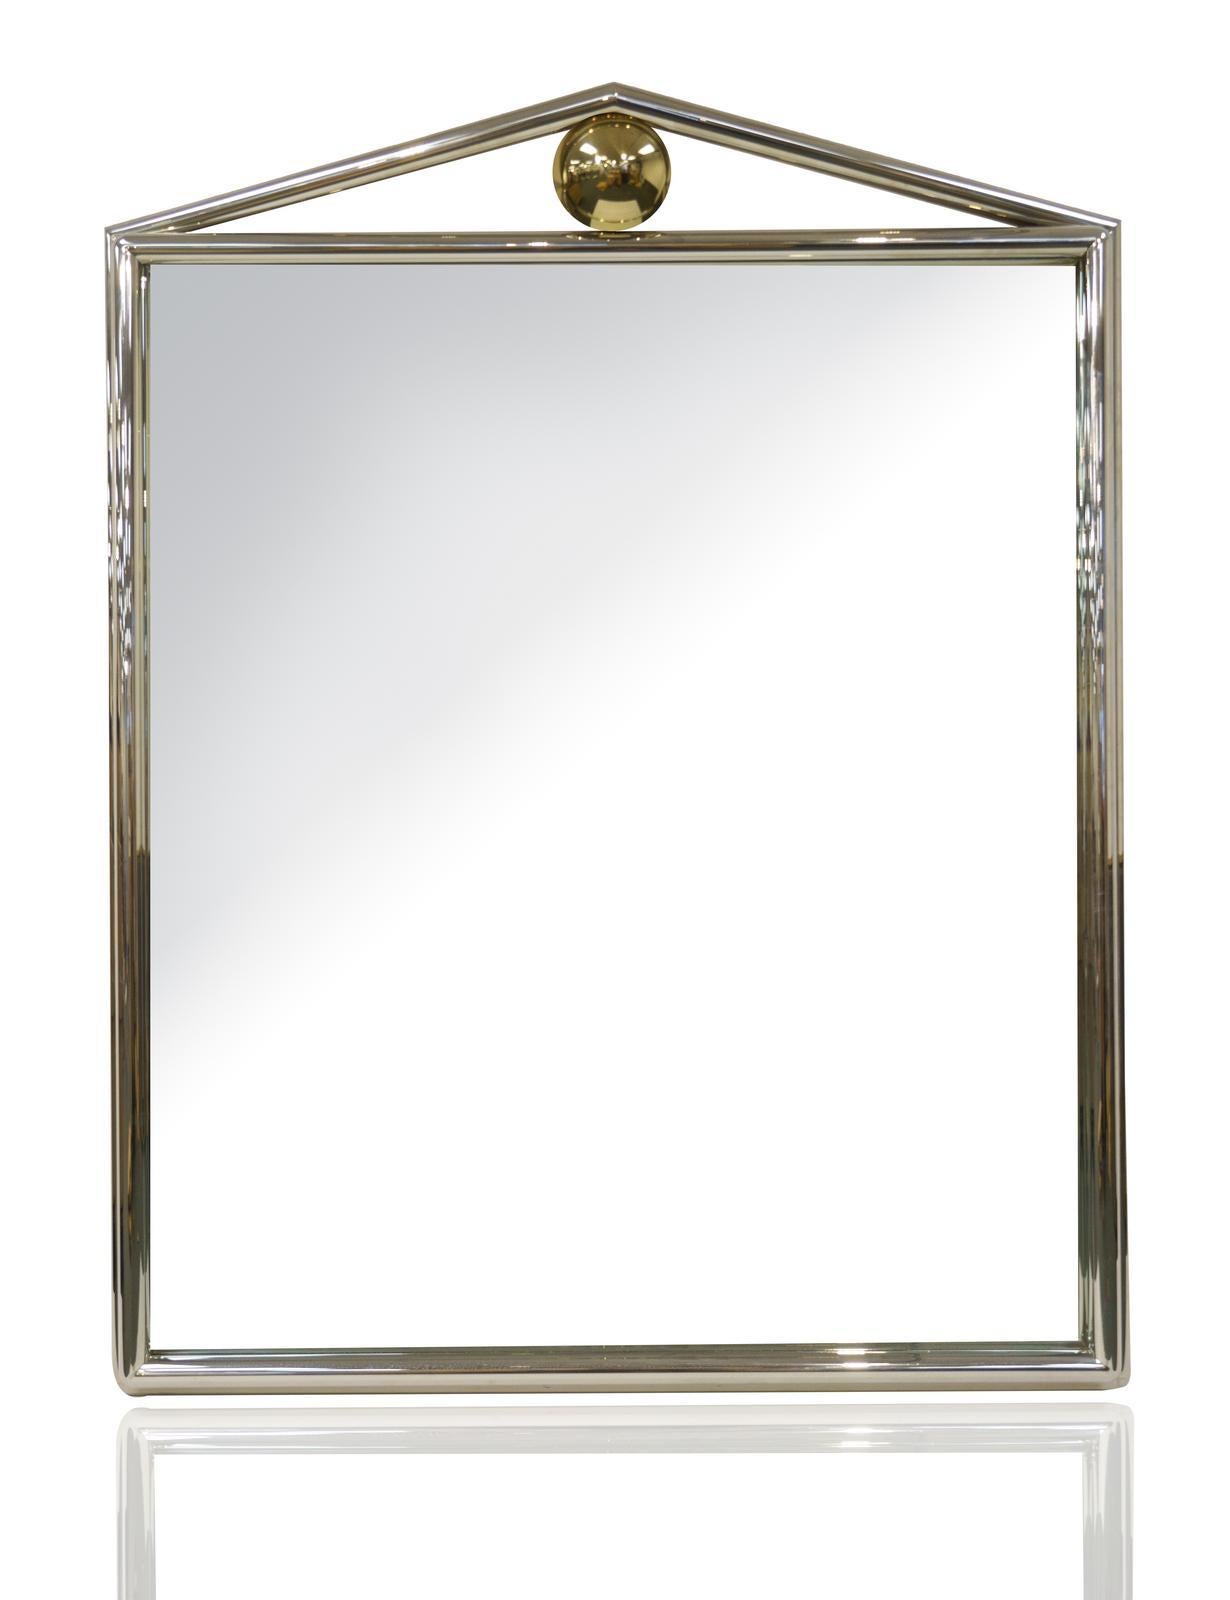 Exceptional Mid Century Modern Chrome Framed / Brass Decorated Mantel Mirror For Sale 3